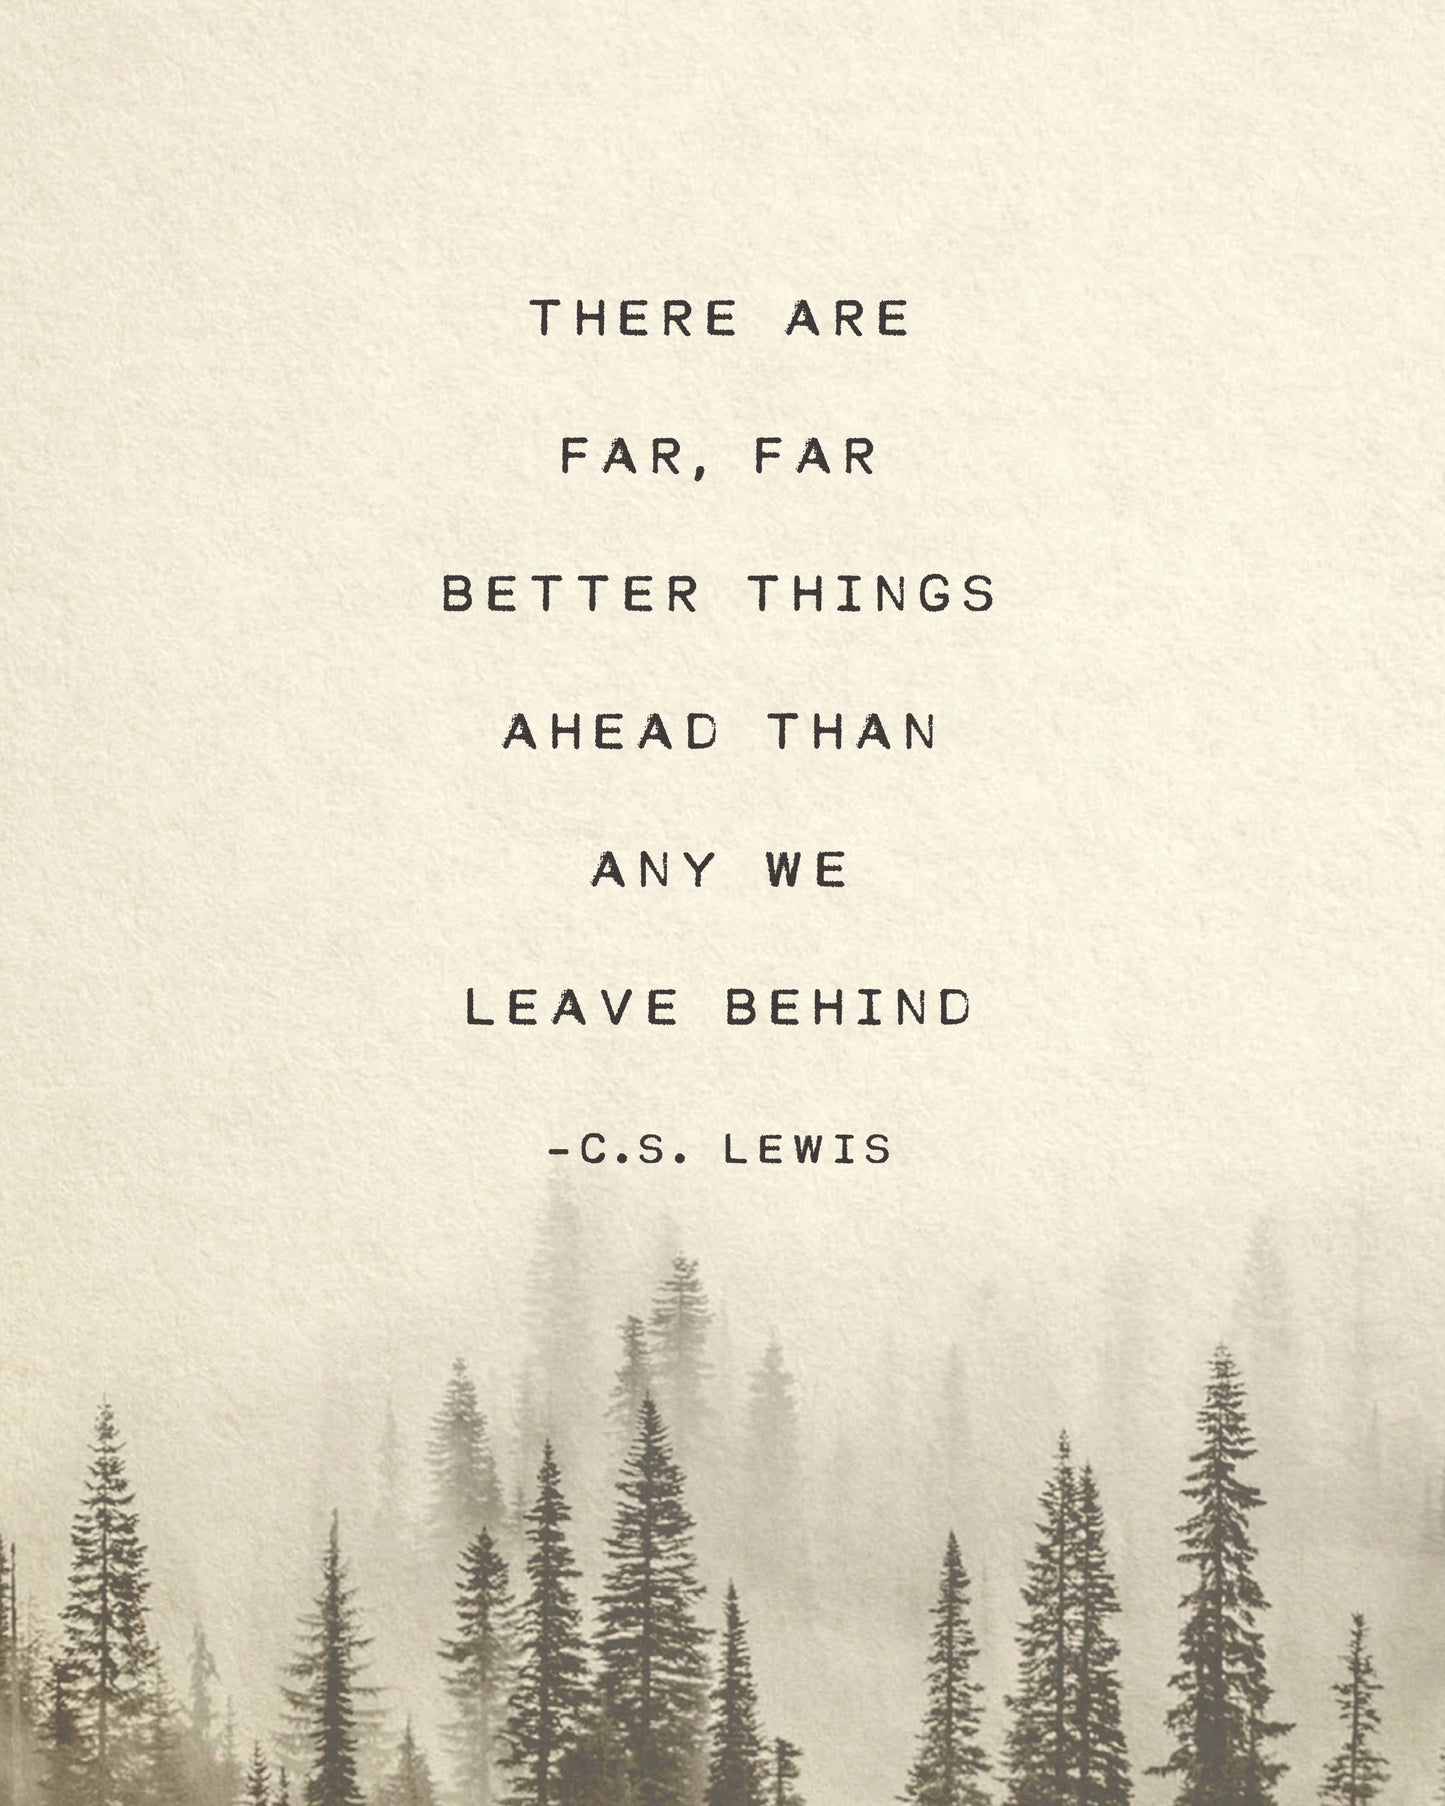 C.S. Lewis quote, there are far far better things ahead than any we leave behind